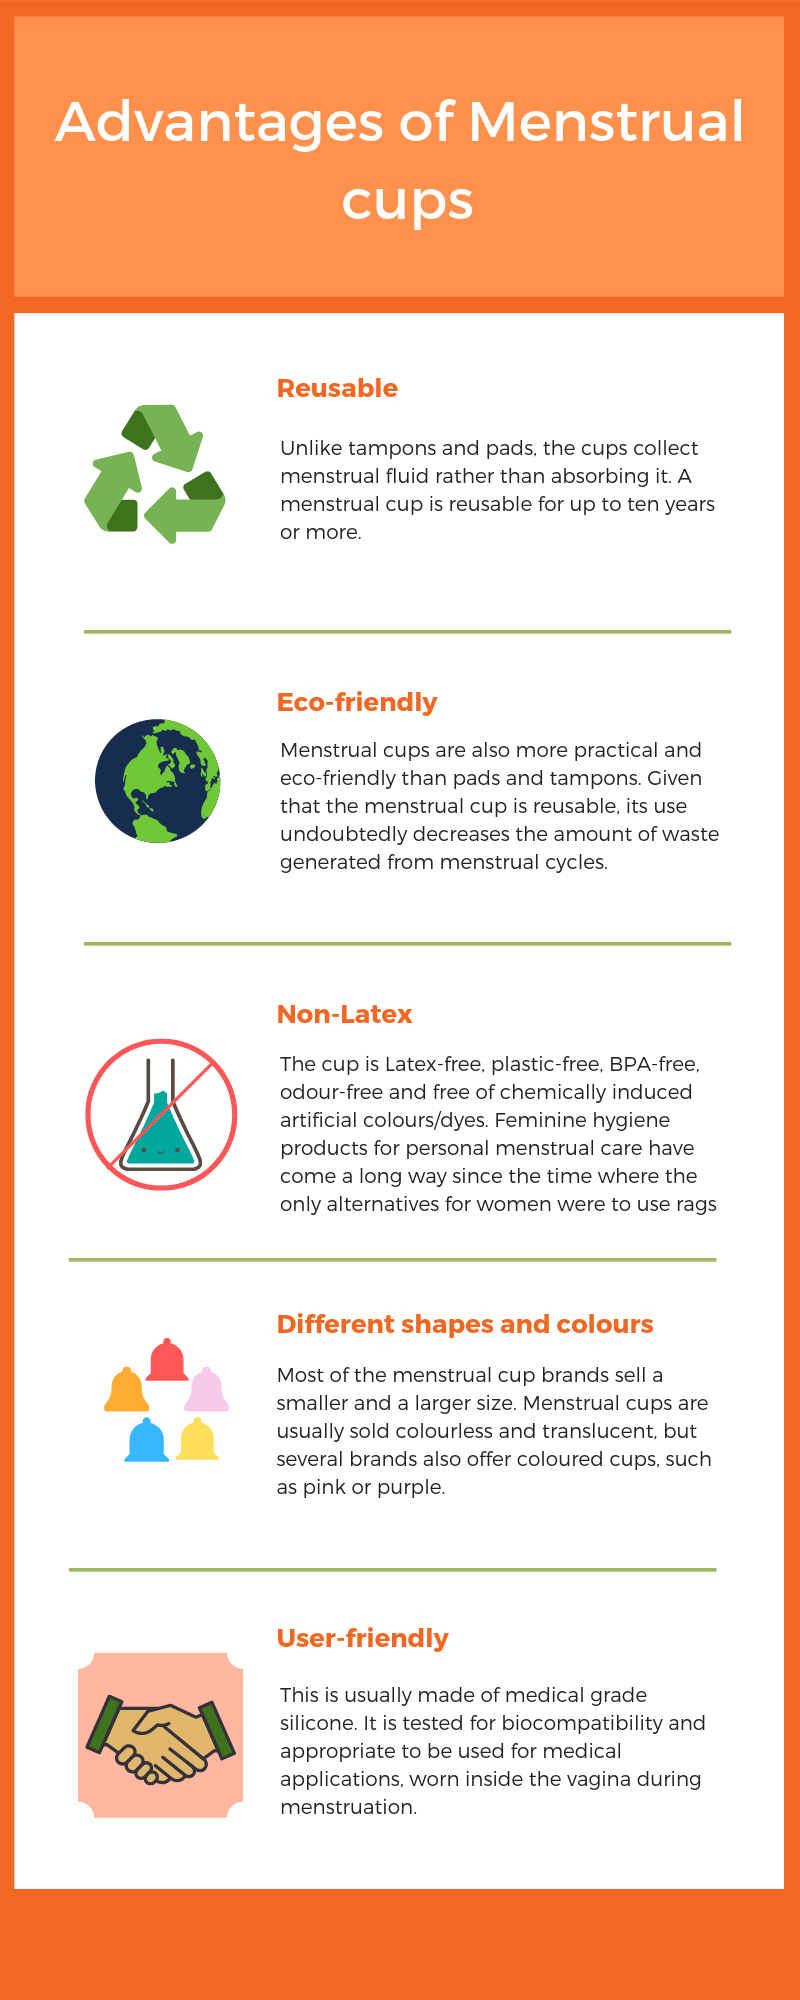 Infographic explaining the advantages of menstrual cups